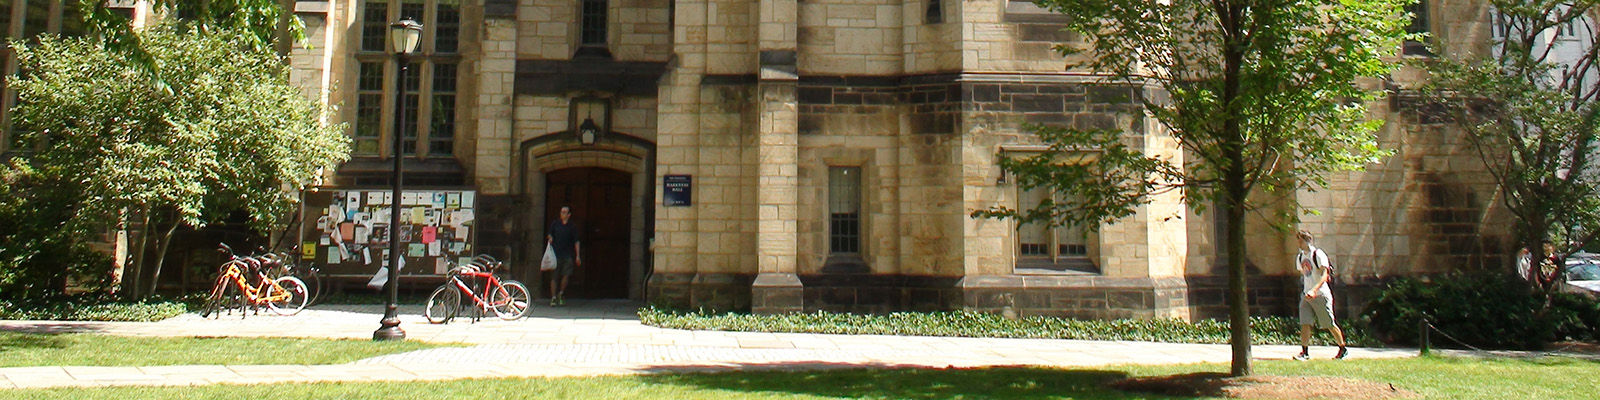 William L. Harkness Hall at Yale